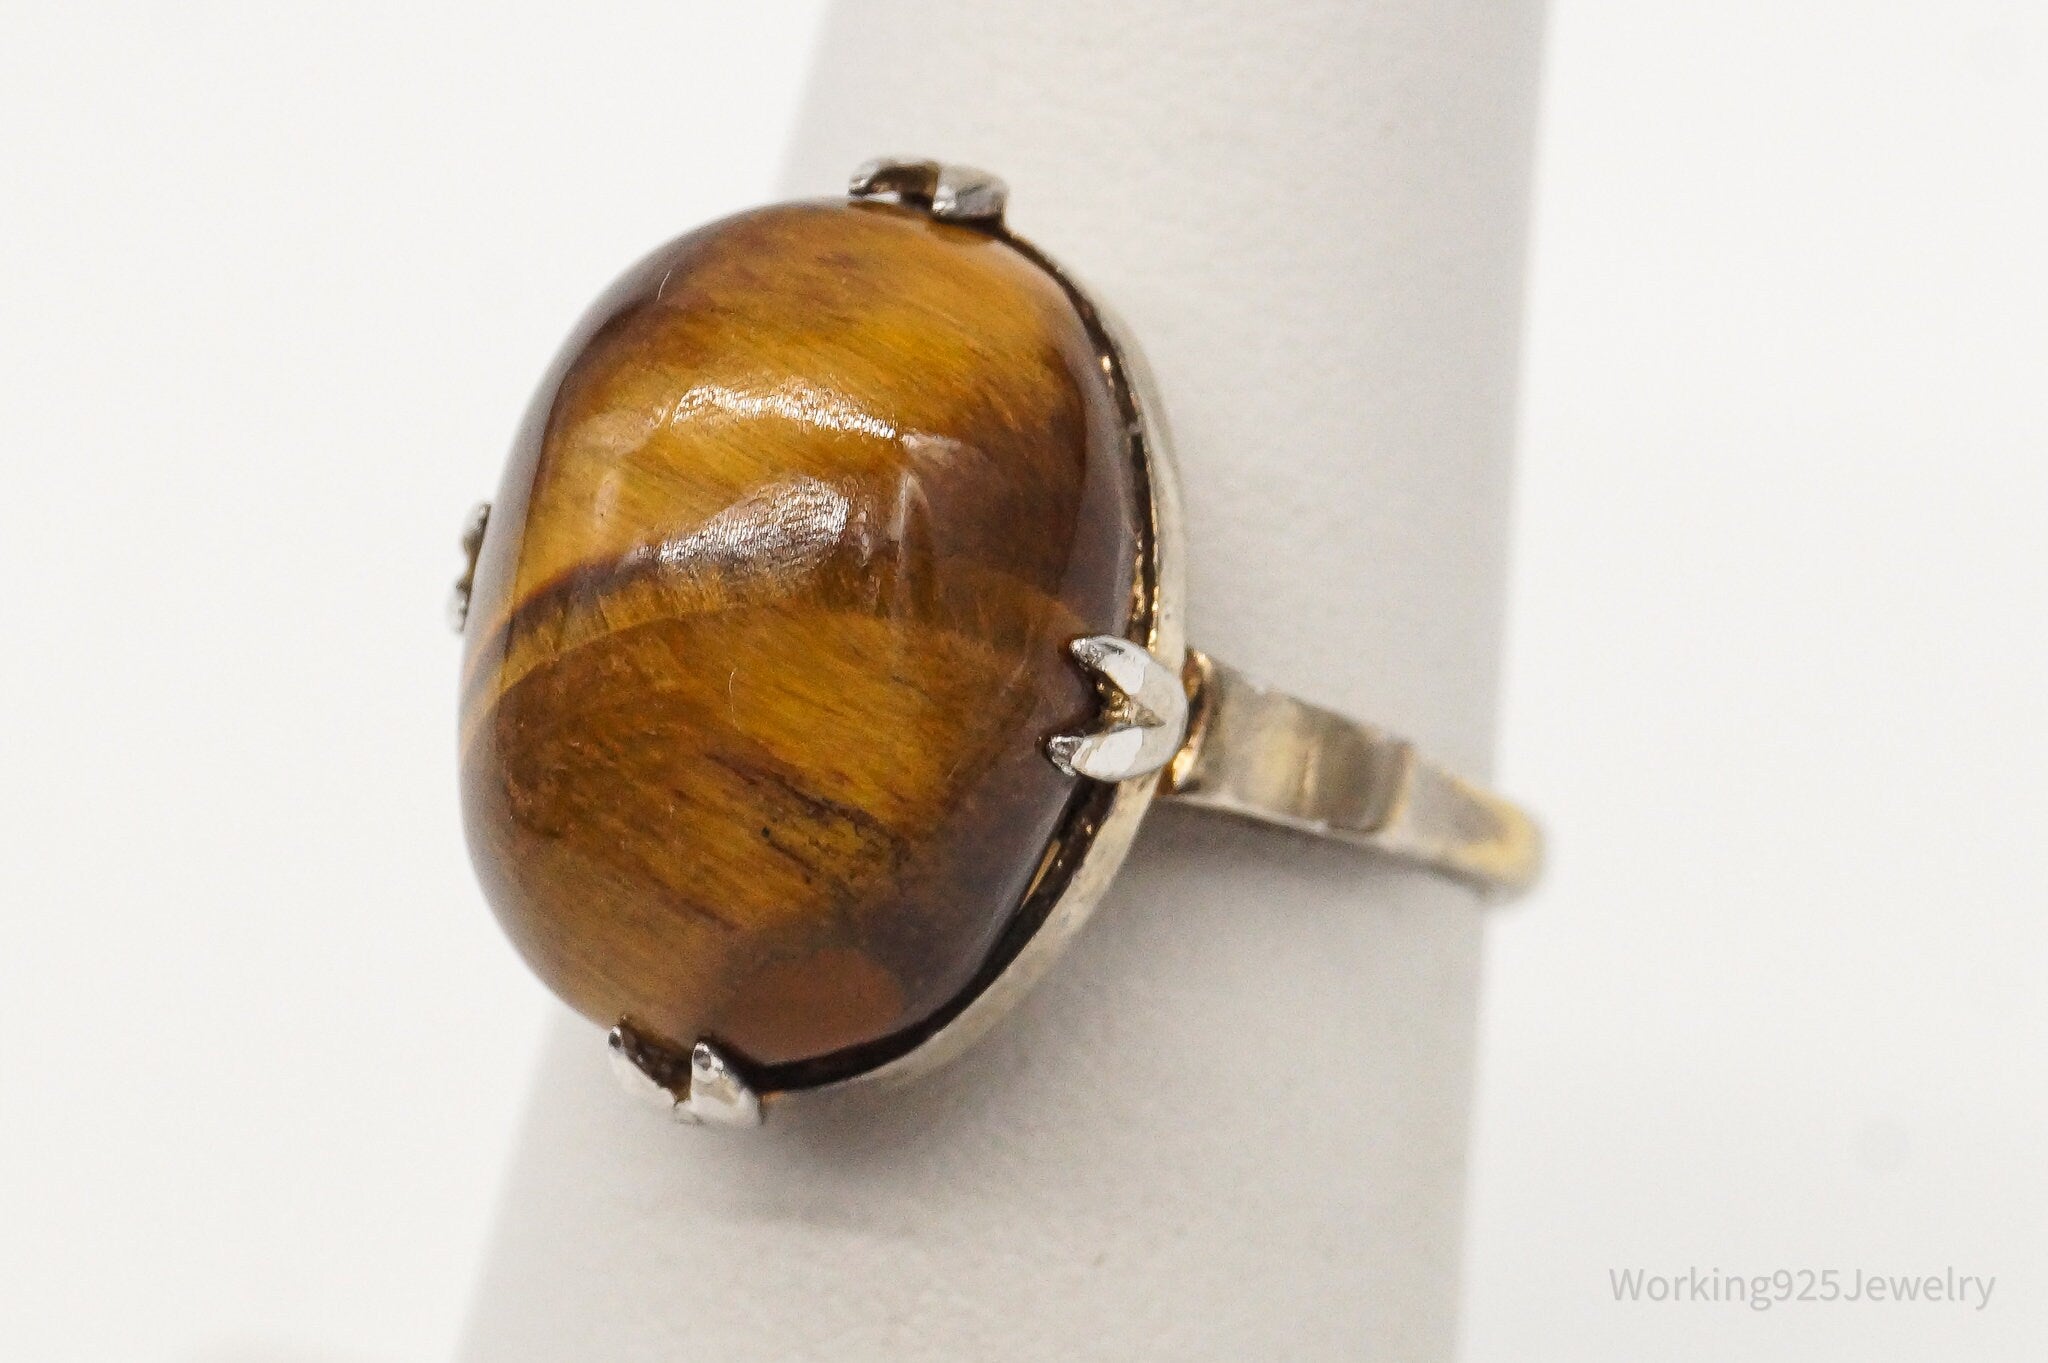 Antique Tigers Eye Gold Wash Silver Ring - Size 5.5